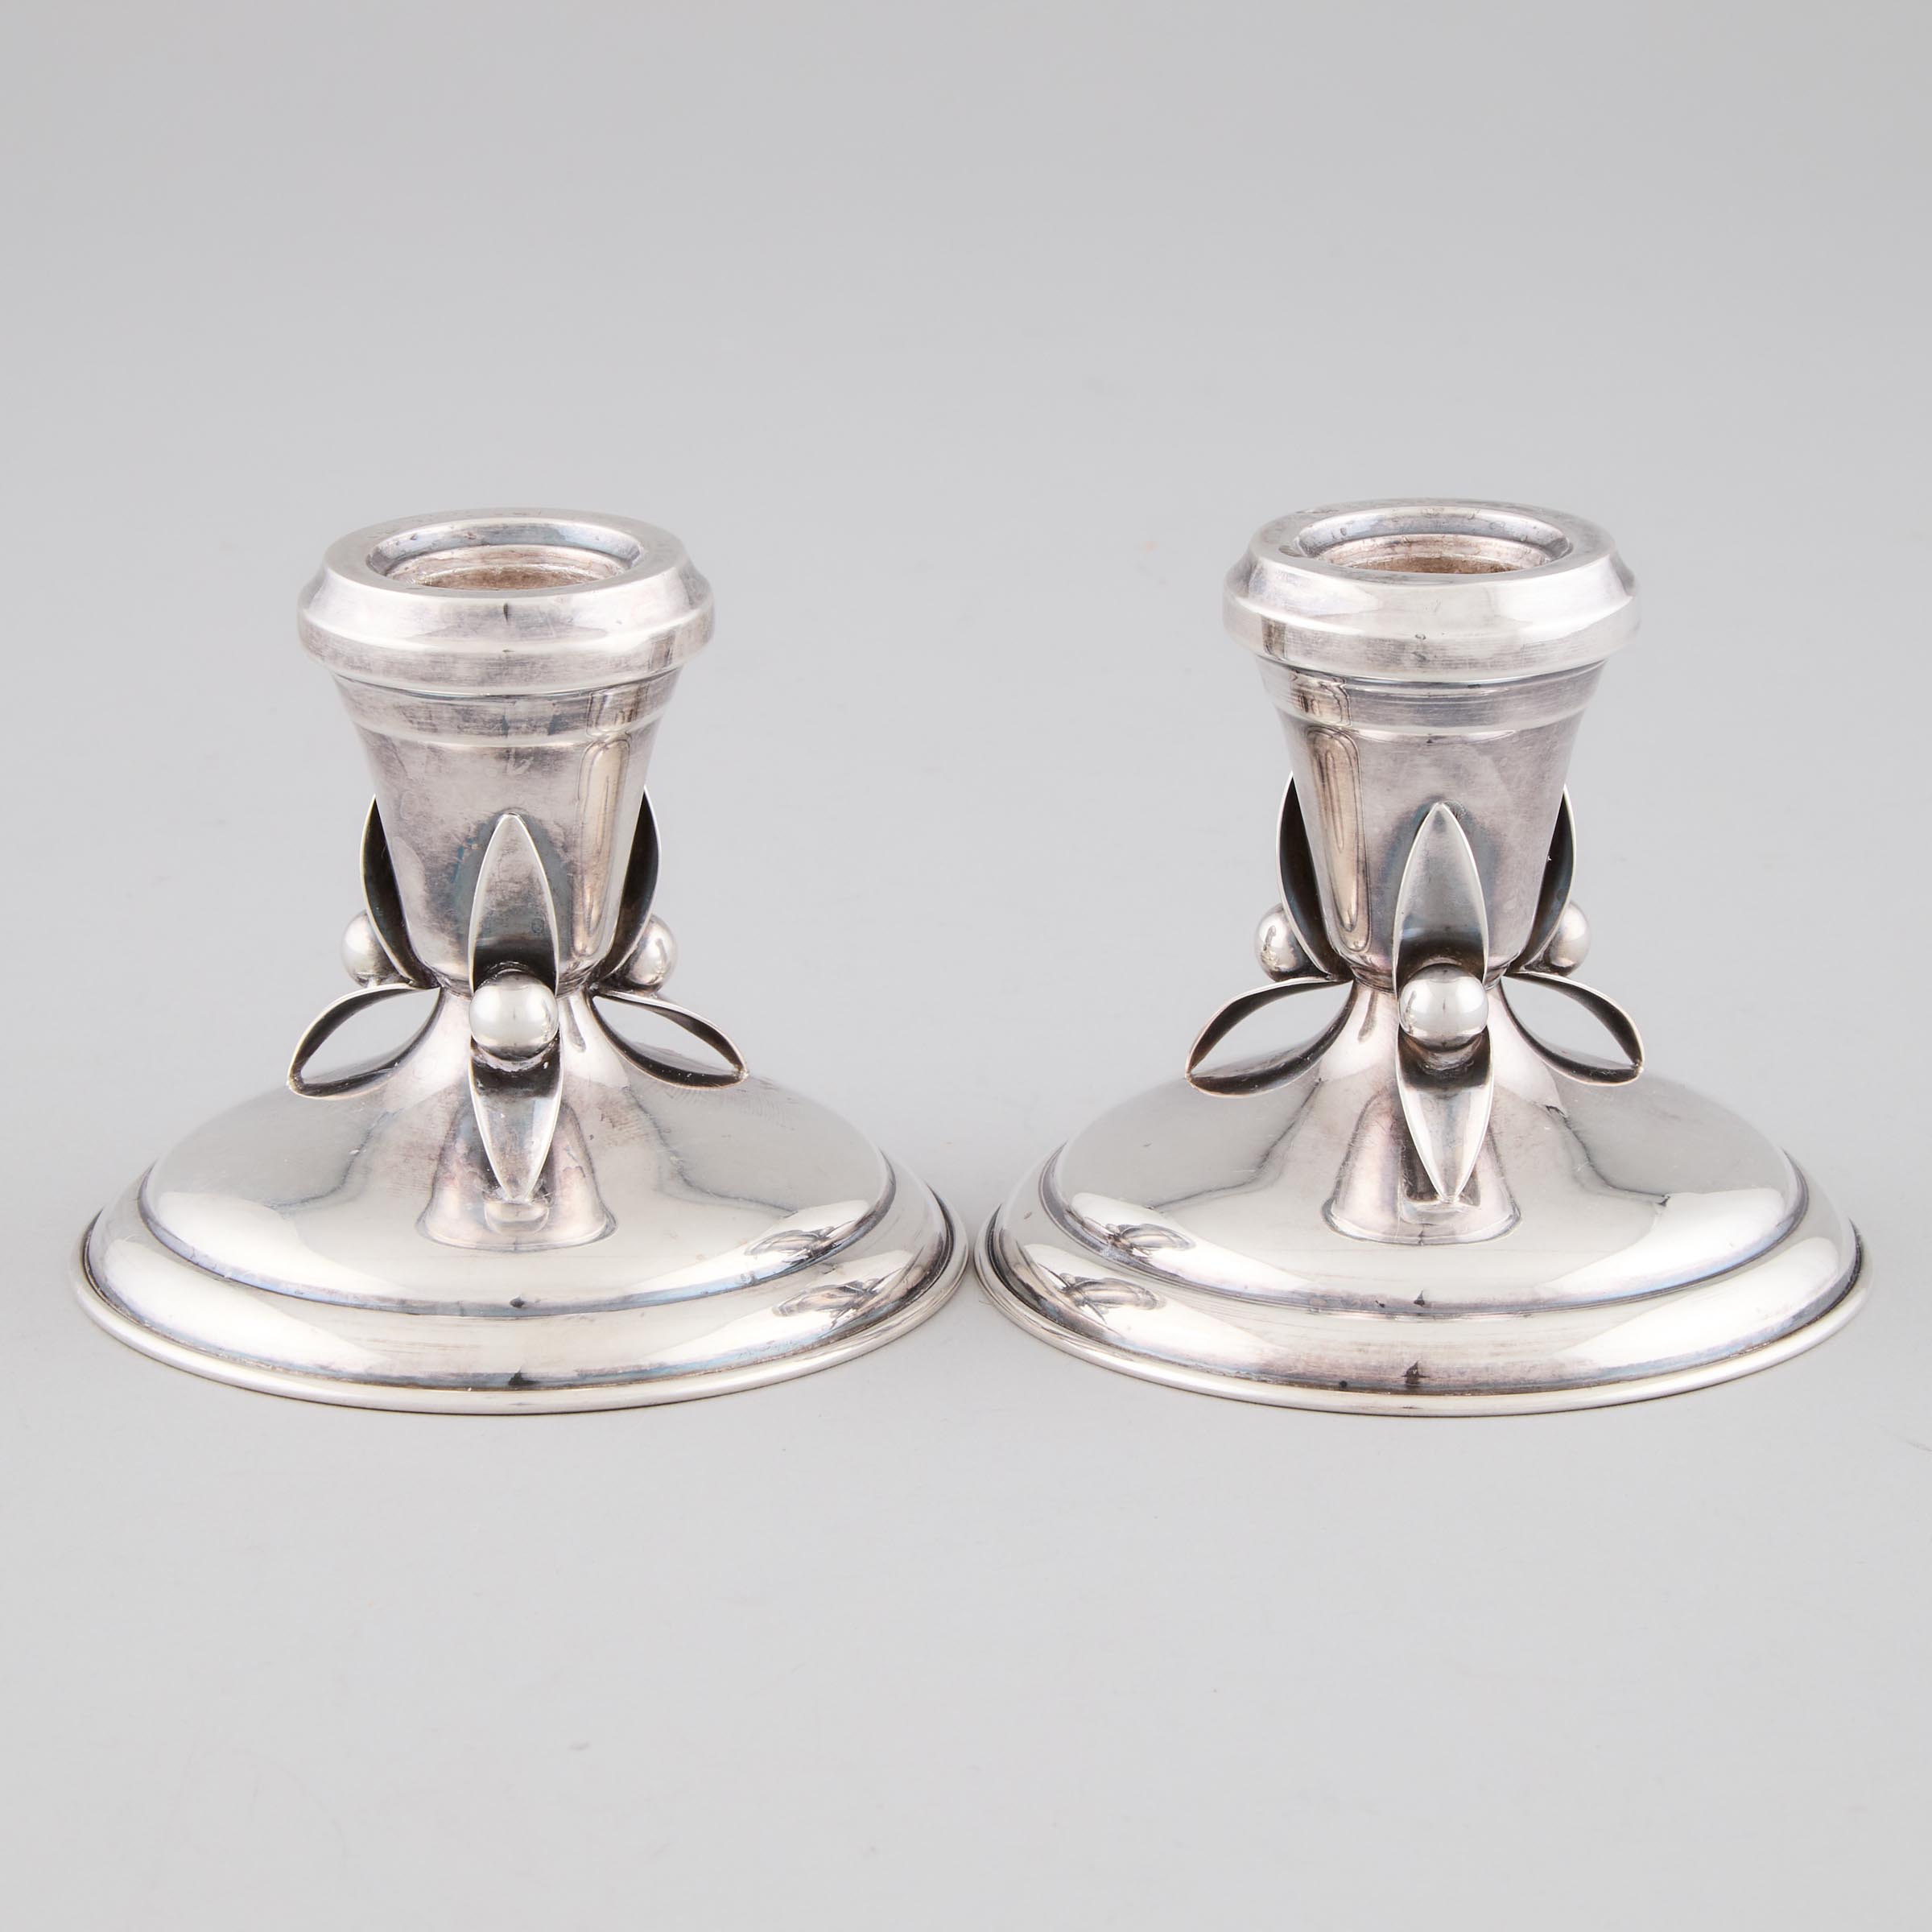 Pair of Canadian Silver Low Candlesticks  2fb049f